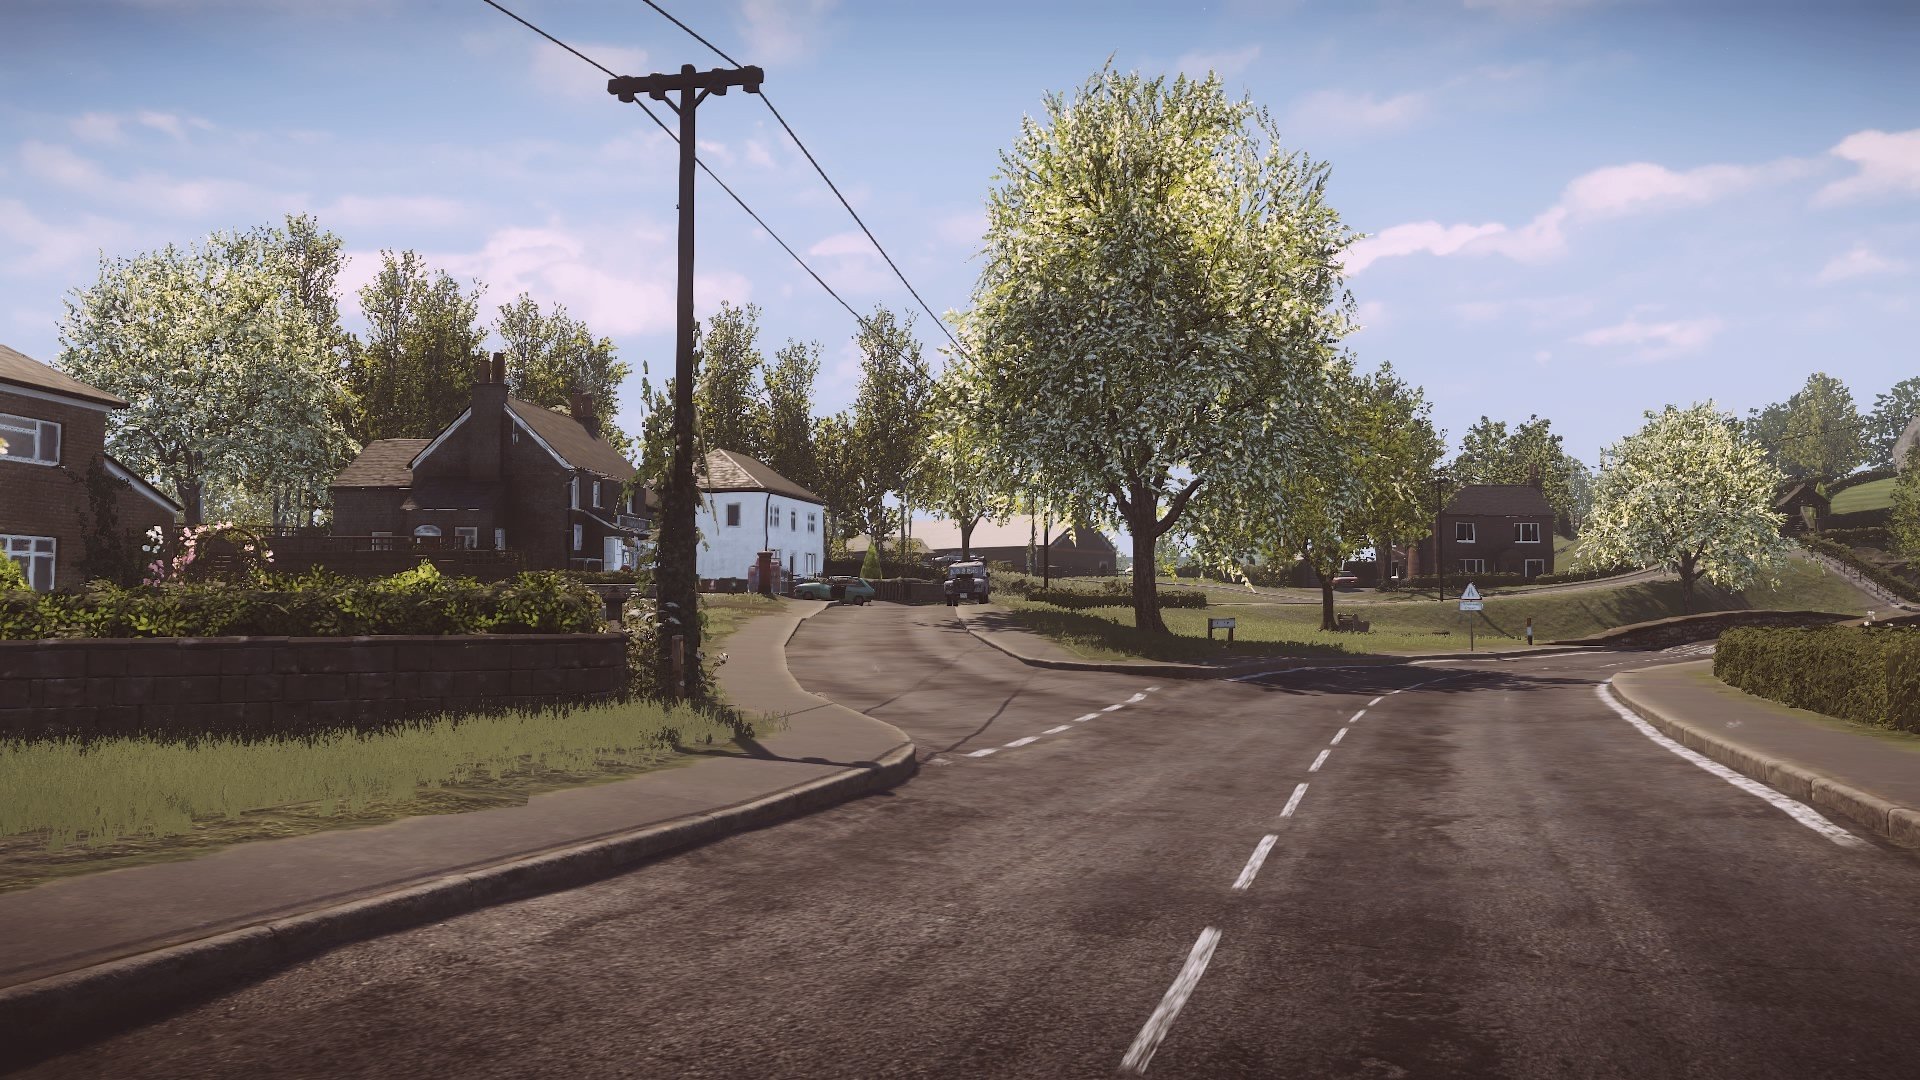 everybody gone to the rapture download free